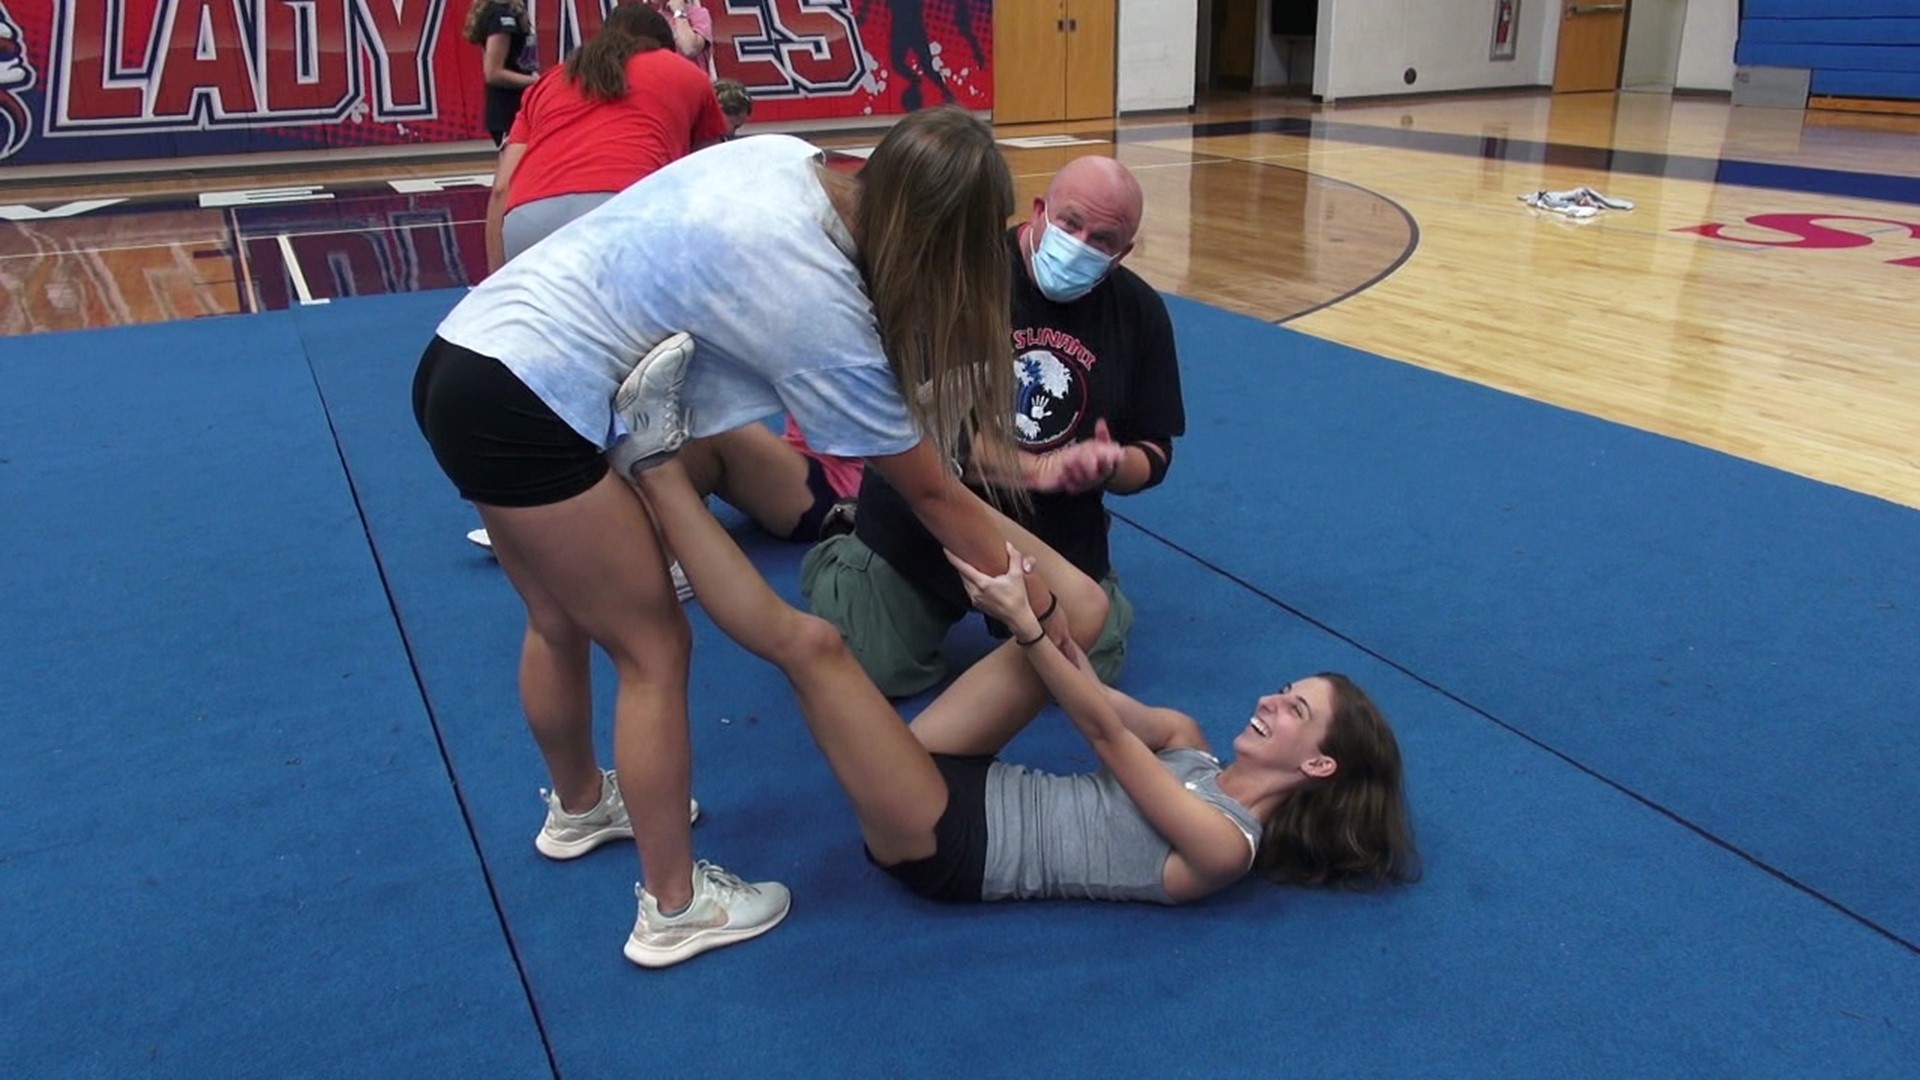 A group of high school athletes in Lackawanna County got a crash course Tuesday on how to protect themselves.